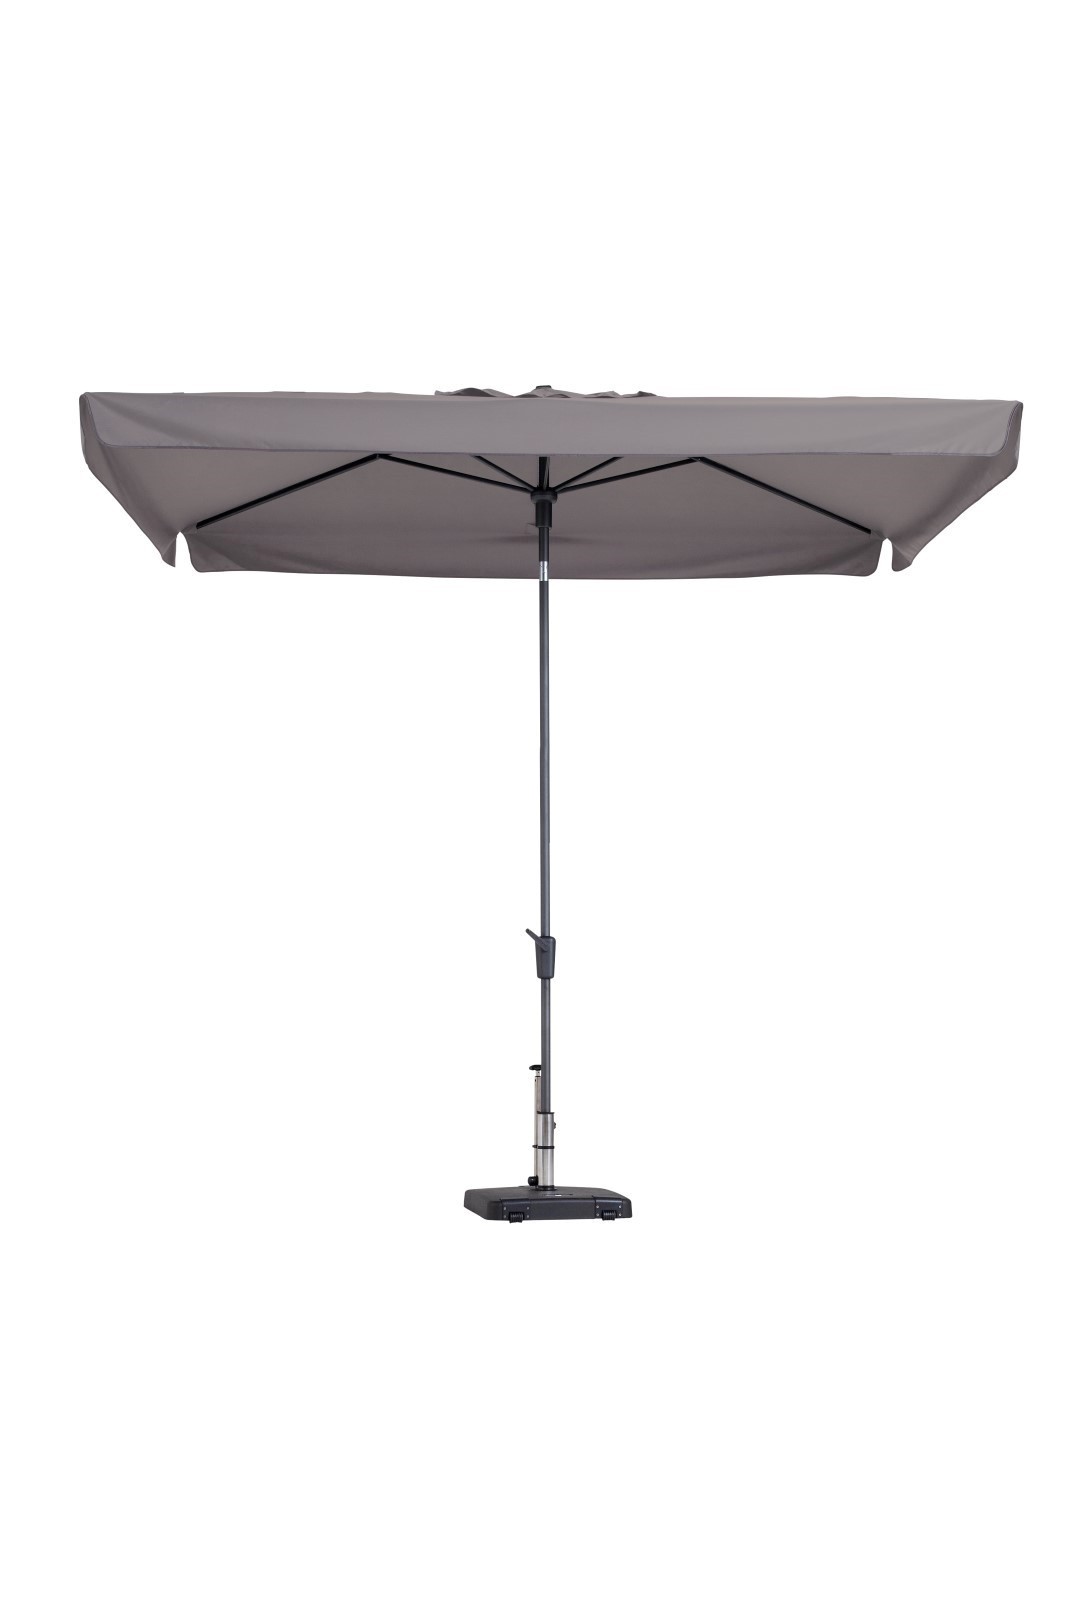 https://www.warentuin.nl/media/catalog/product/S/C/SCAN8713229247607_madison_parasol_delos_luxe_200x300_cm_polyester_taupe_madison_141c.jpg